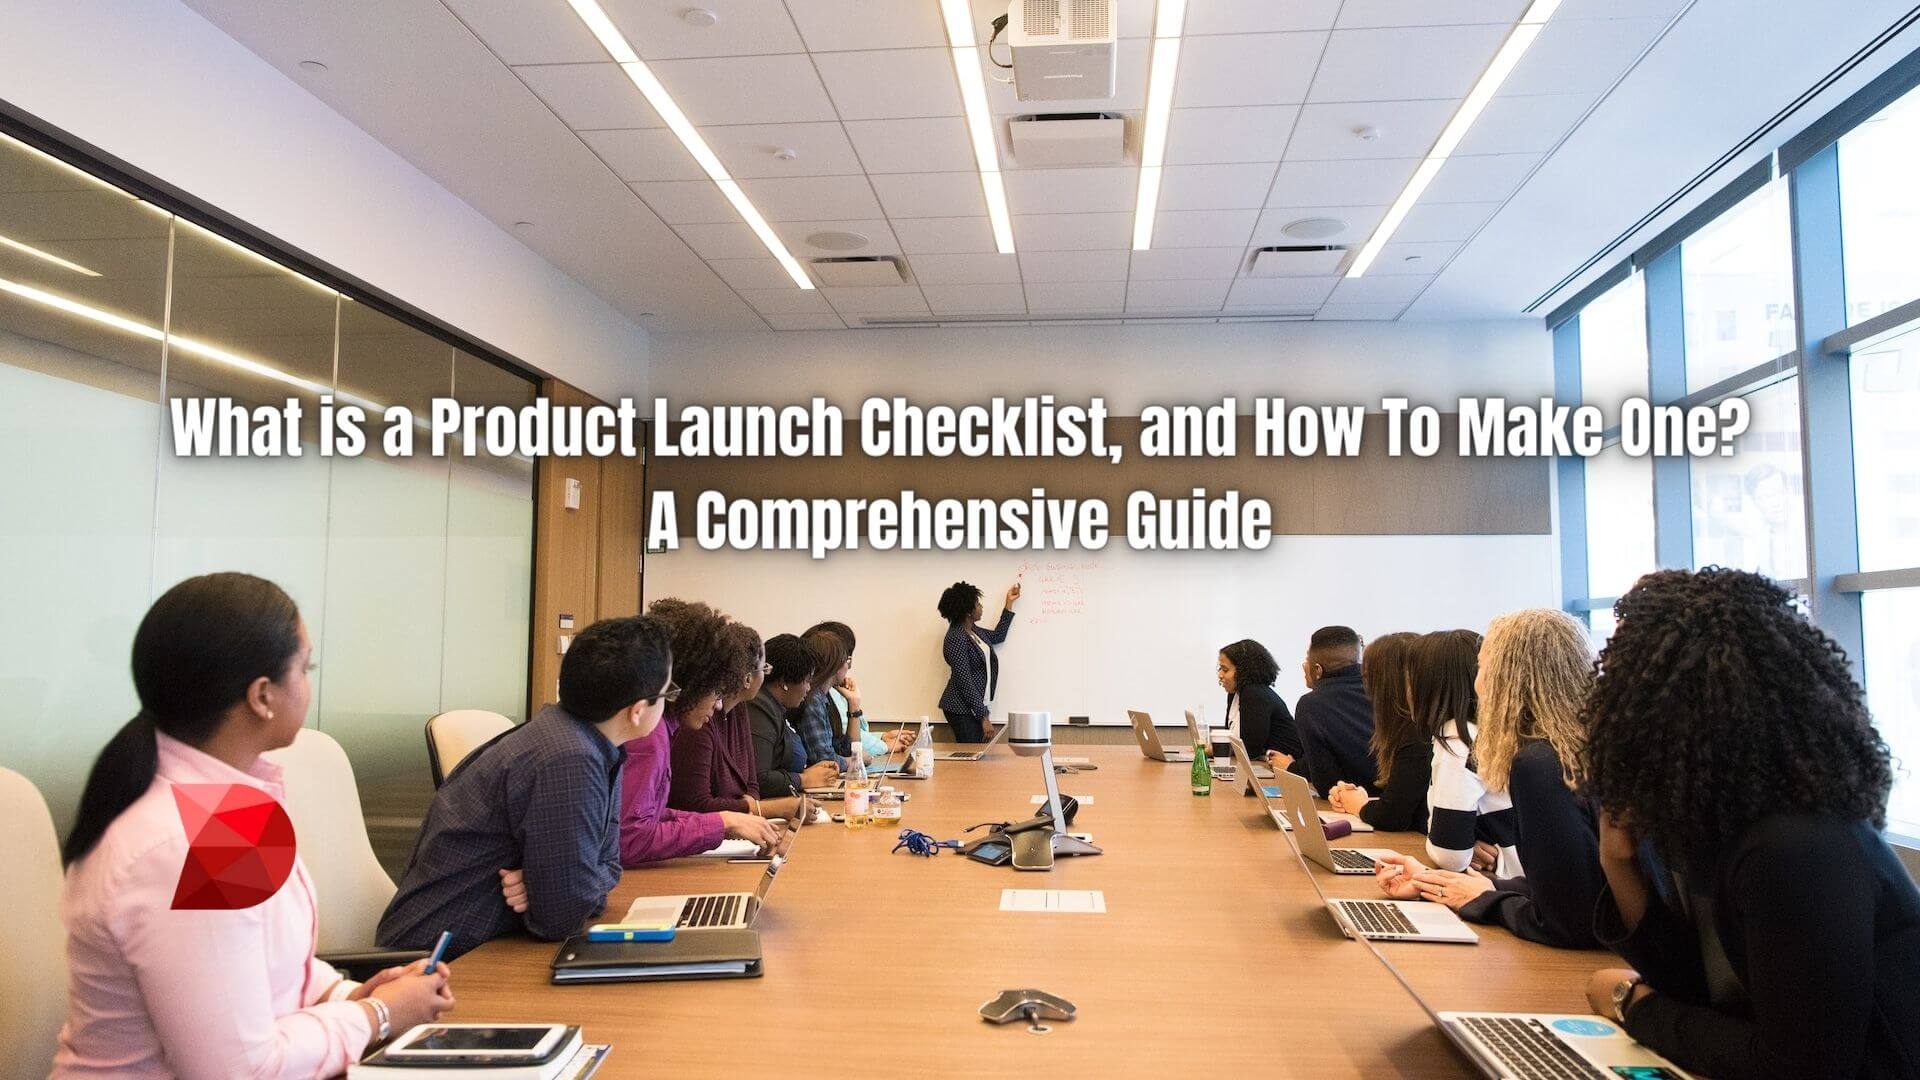 A product launch checklist is a list of tasks and considerations to be addressed before releasing a new product. Here's how to make one!